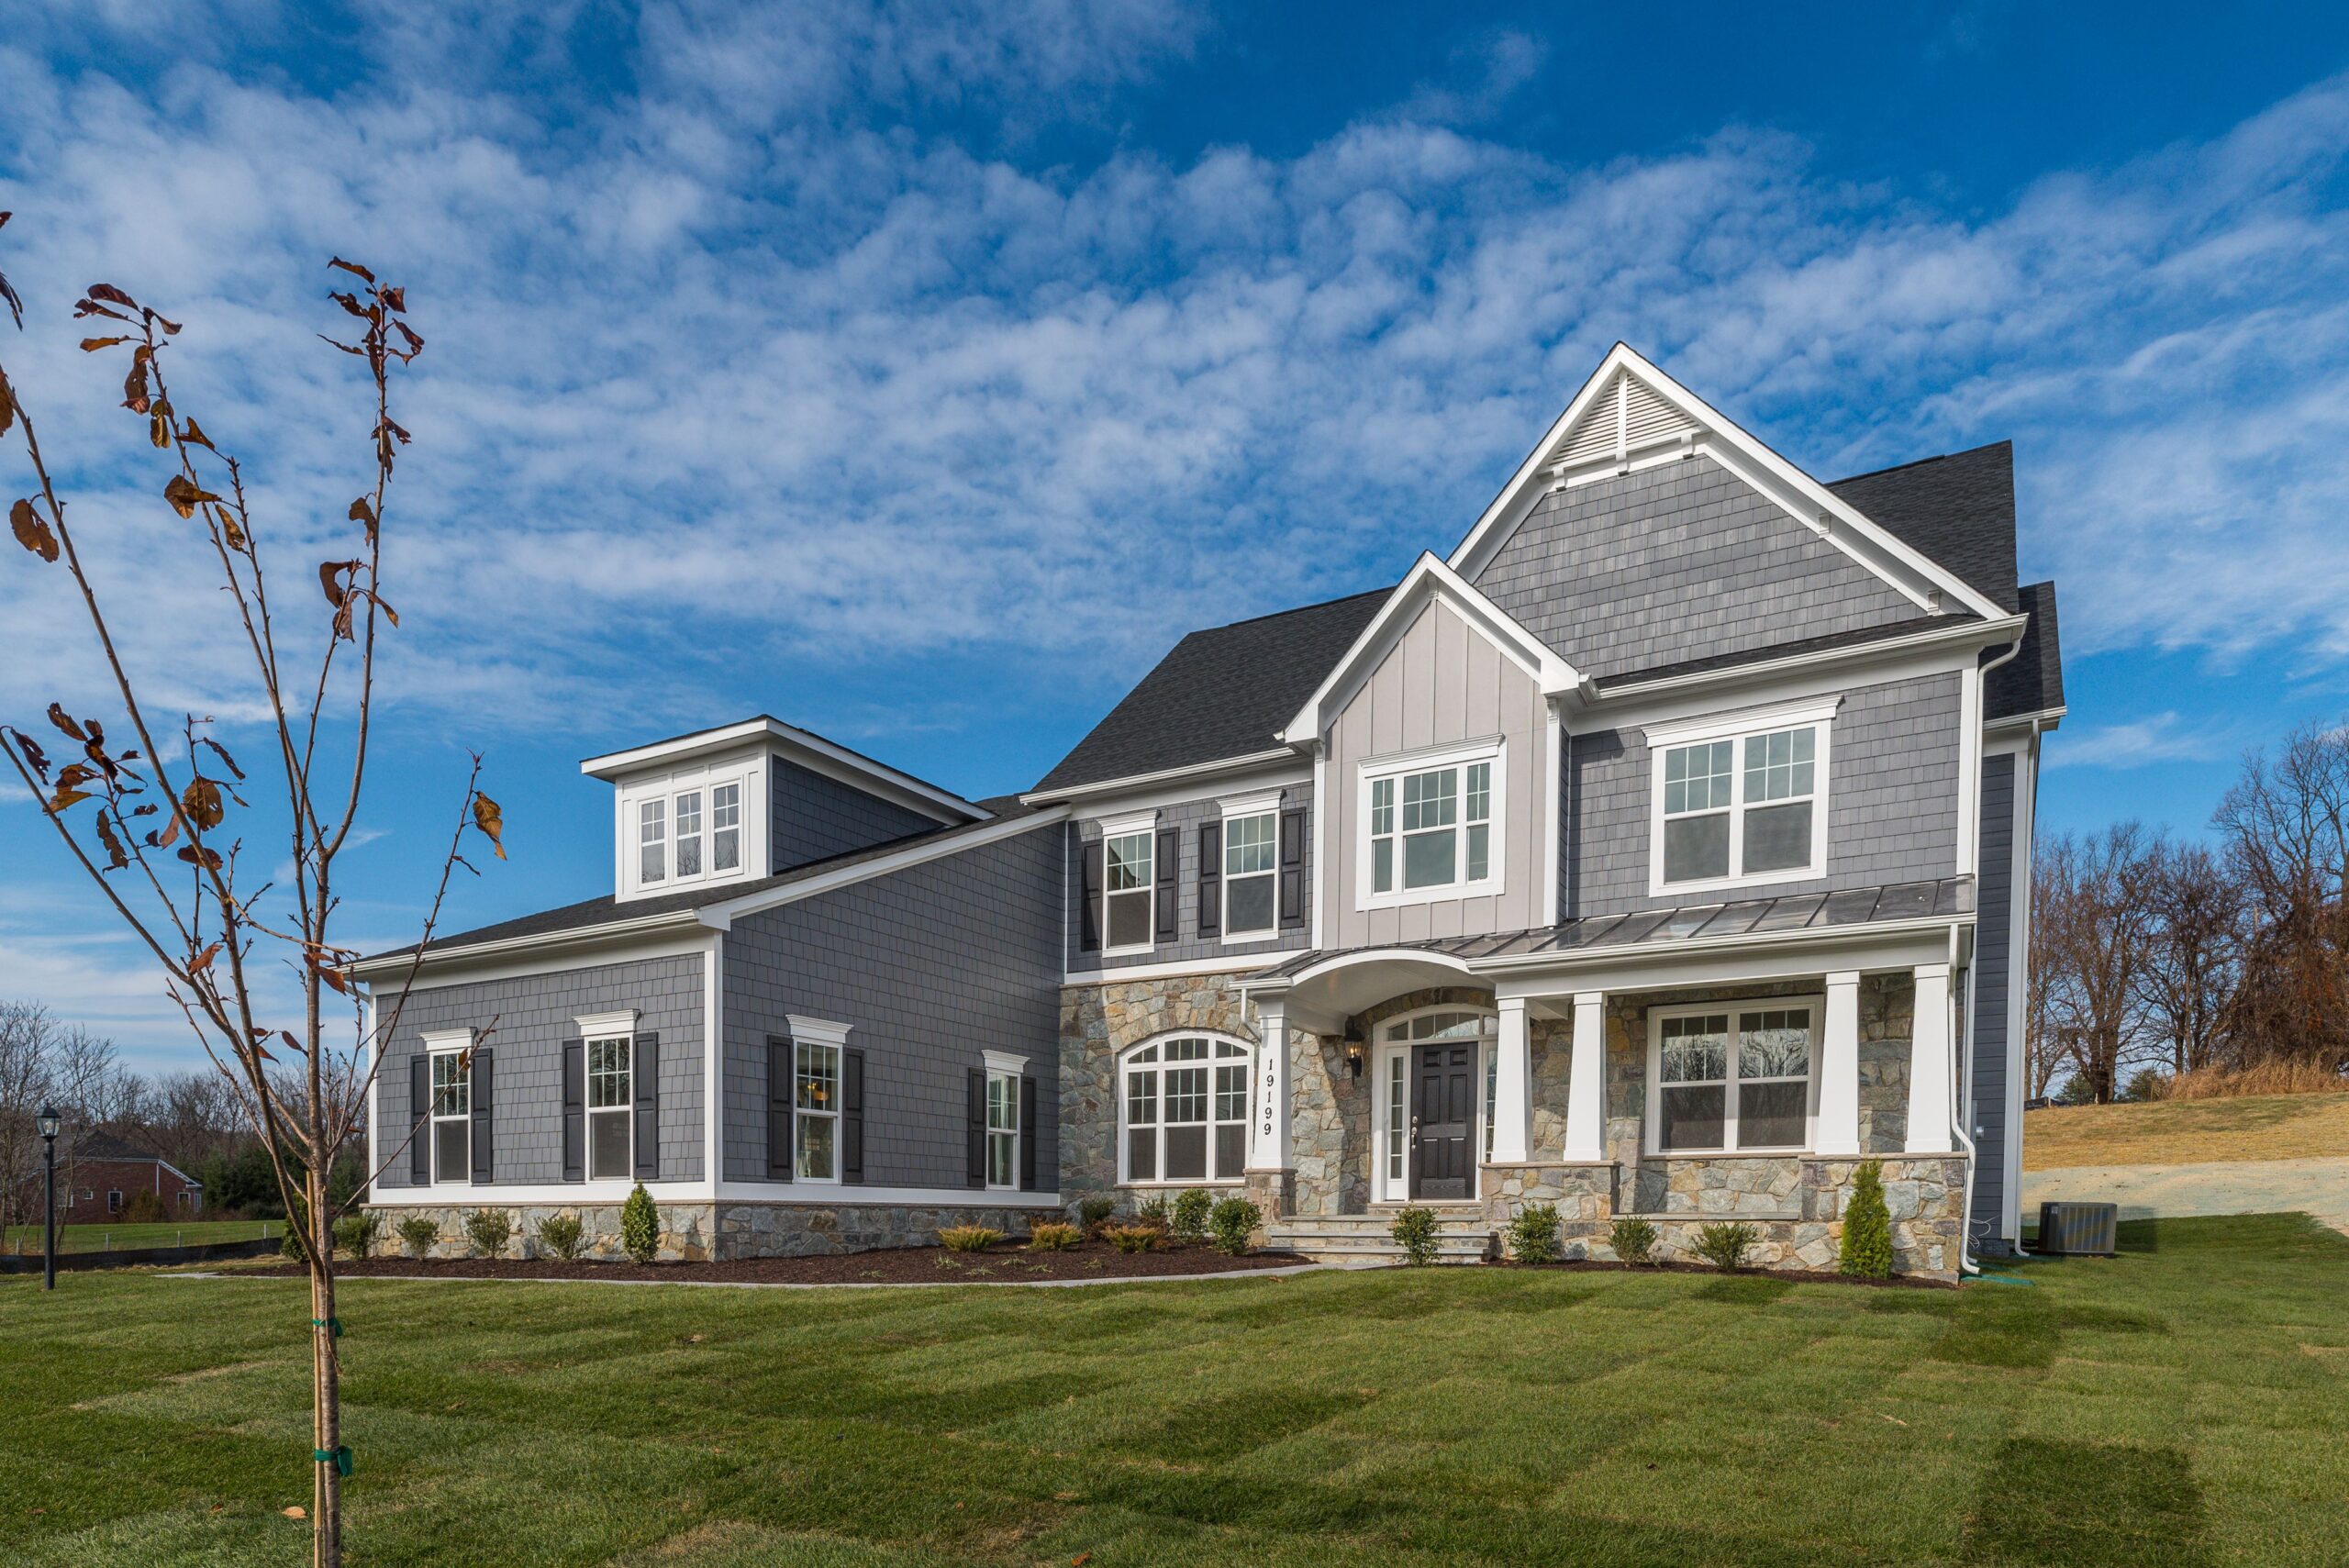 Why You Should Build a Custom Home With Craftmark